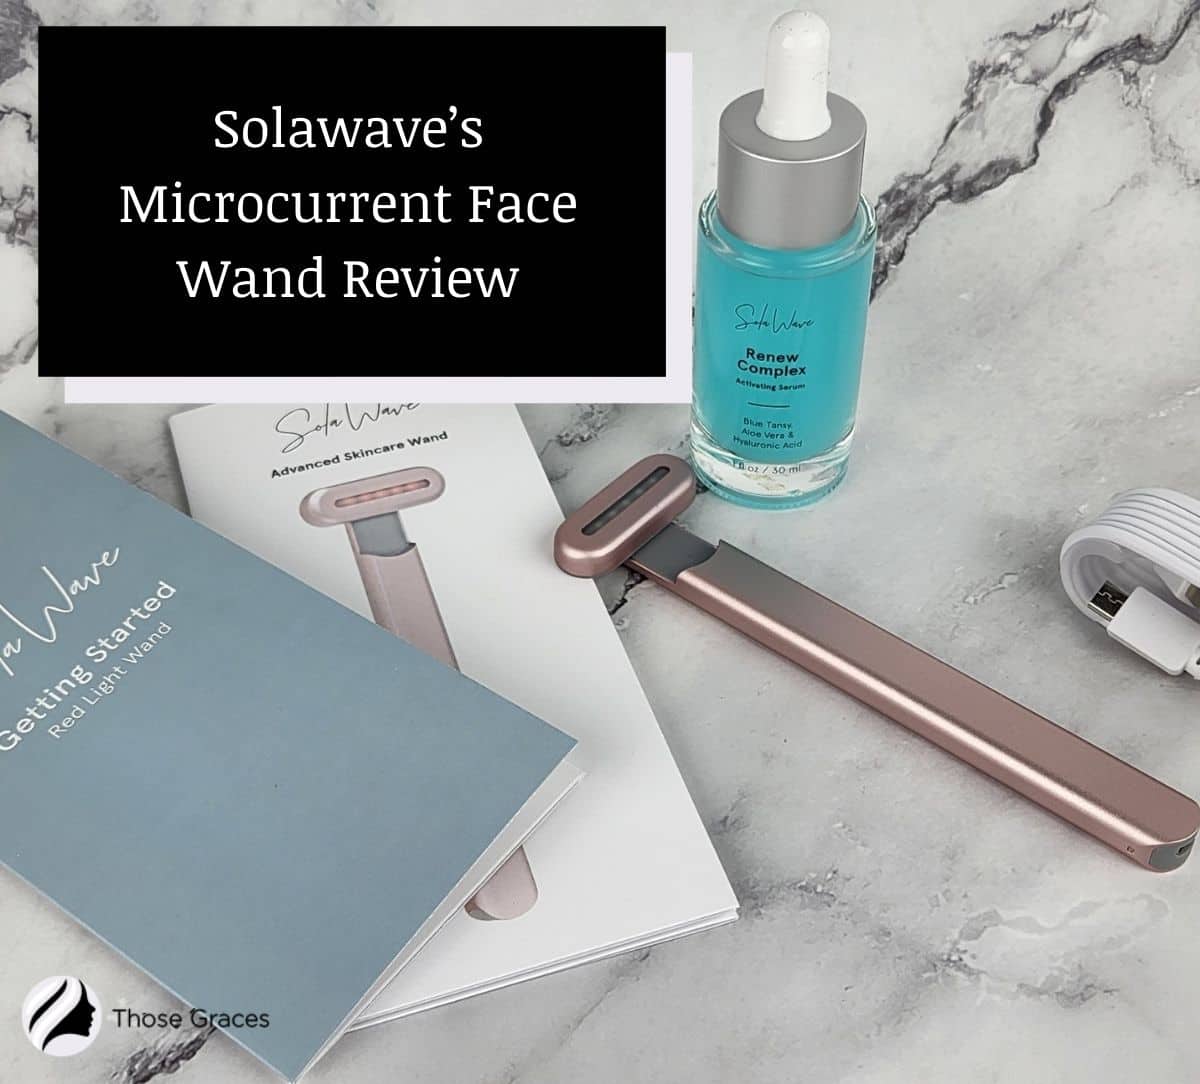 solawave facial wand and renew complex serum